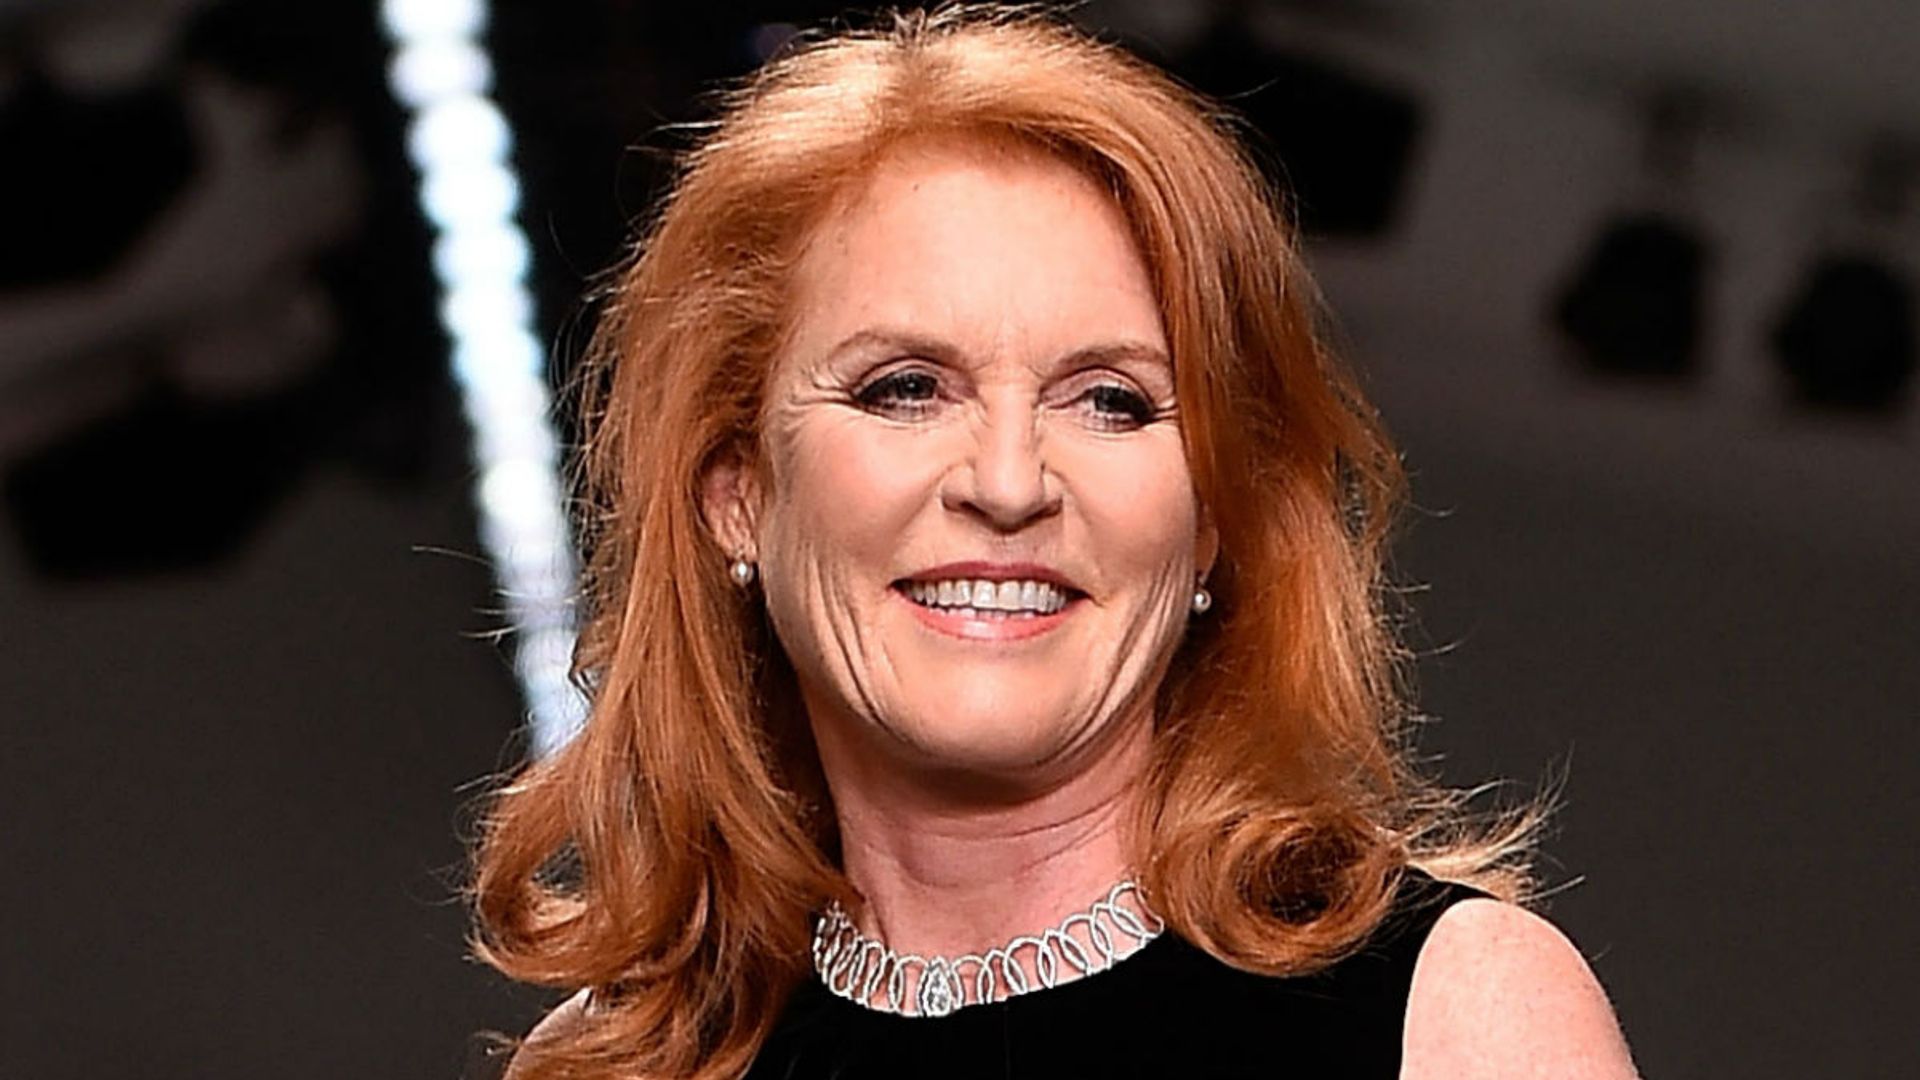 Sarah Ferguson, News about the former wife of Prince ...
